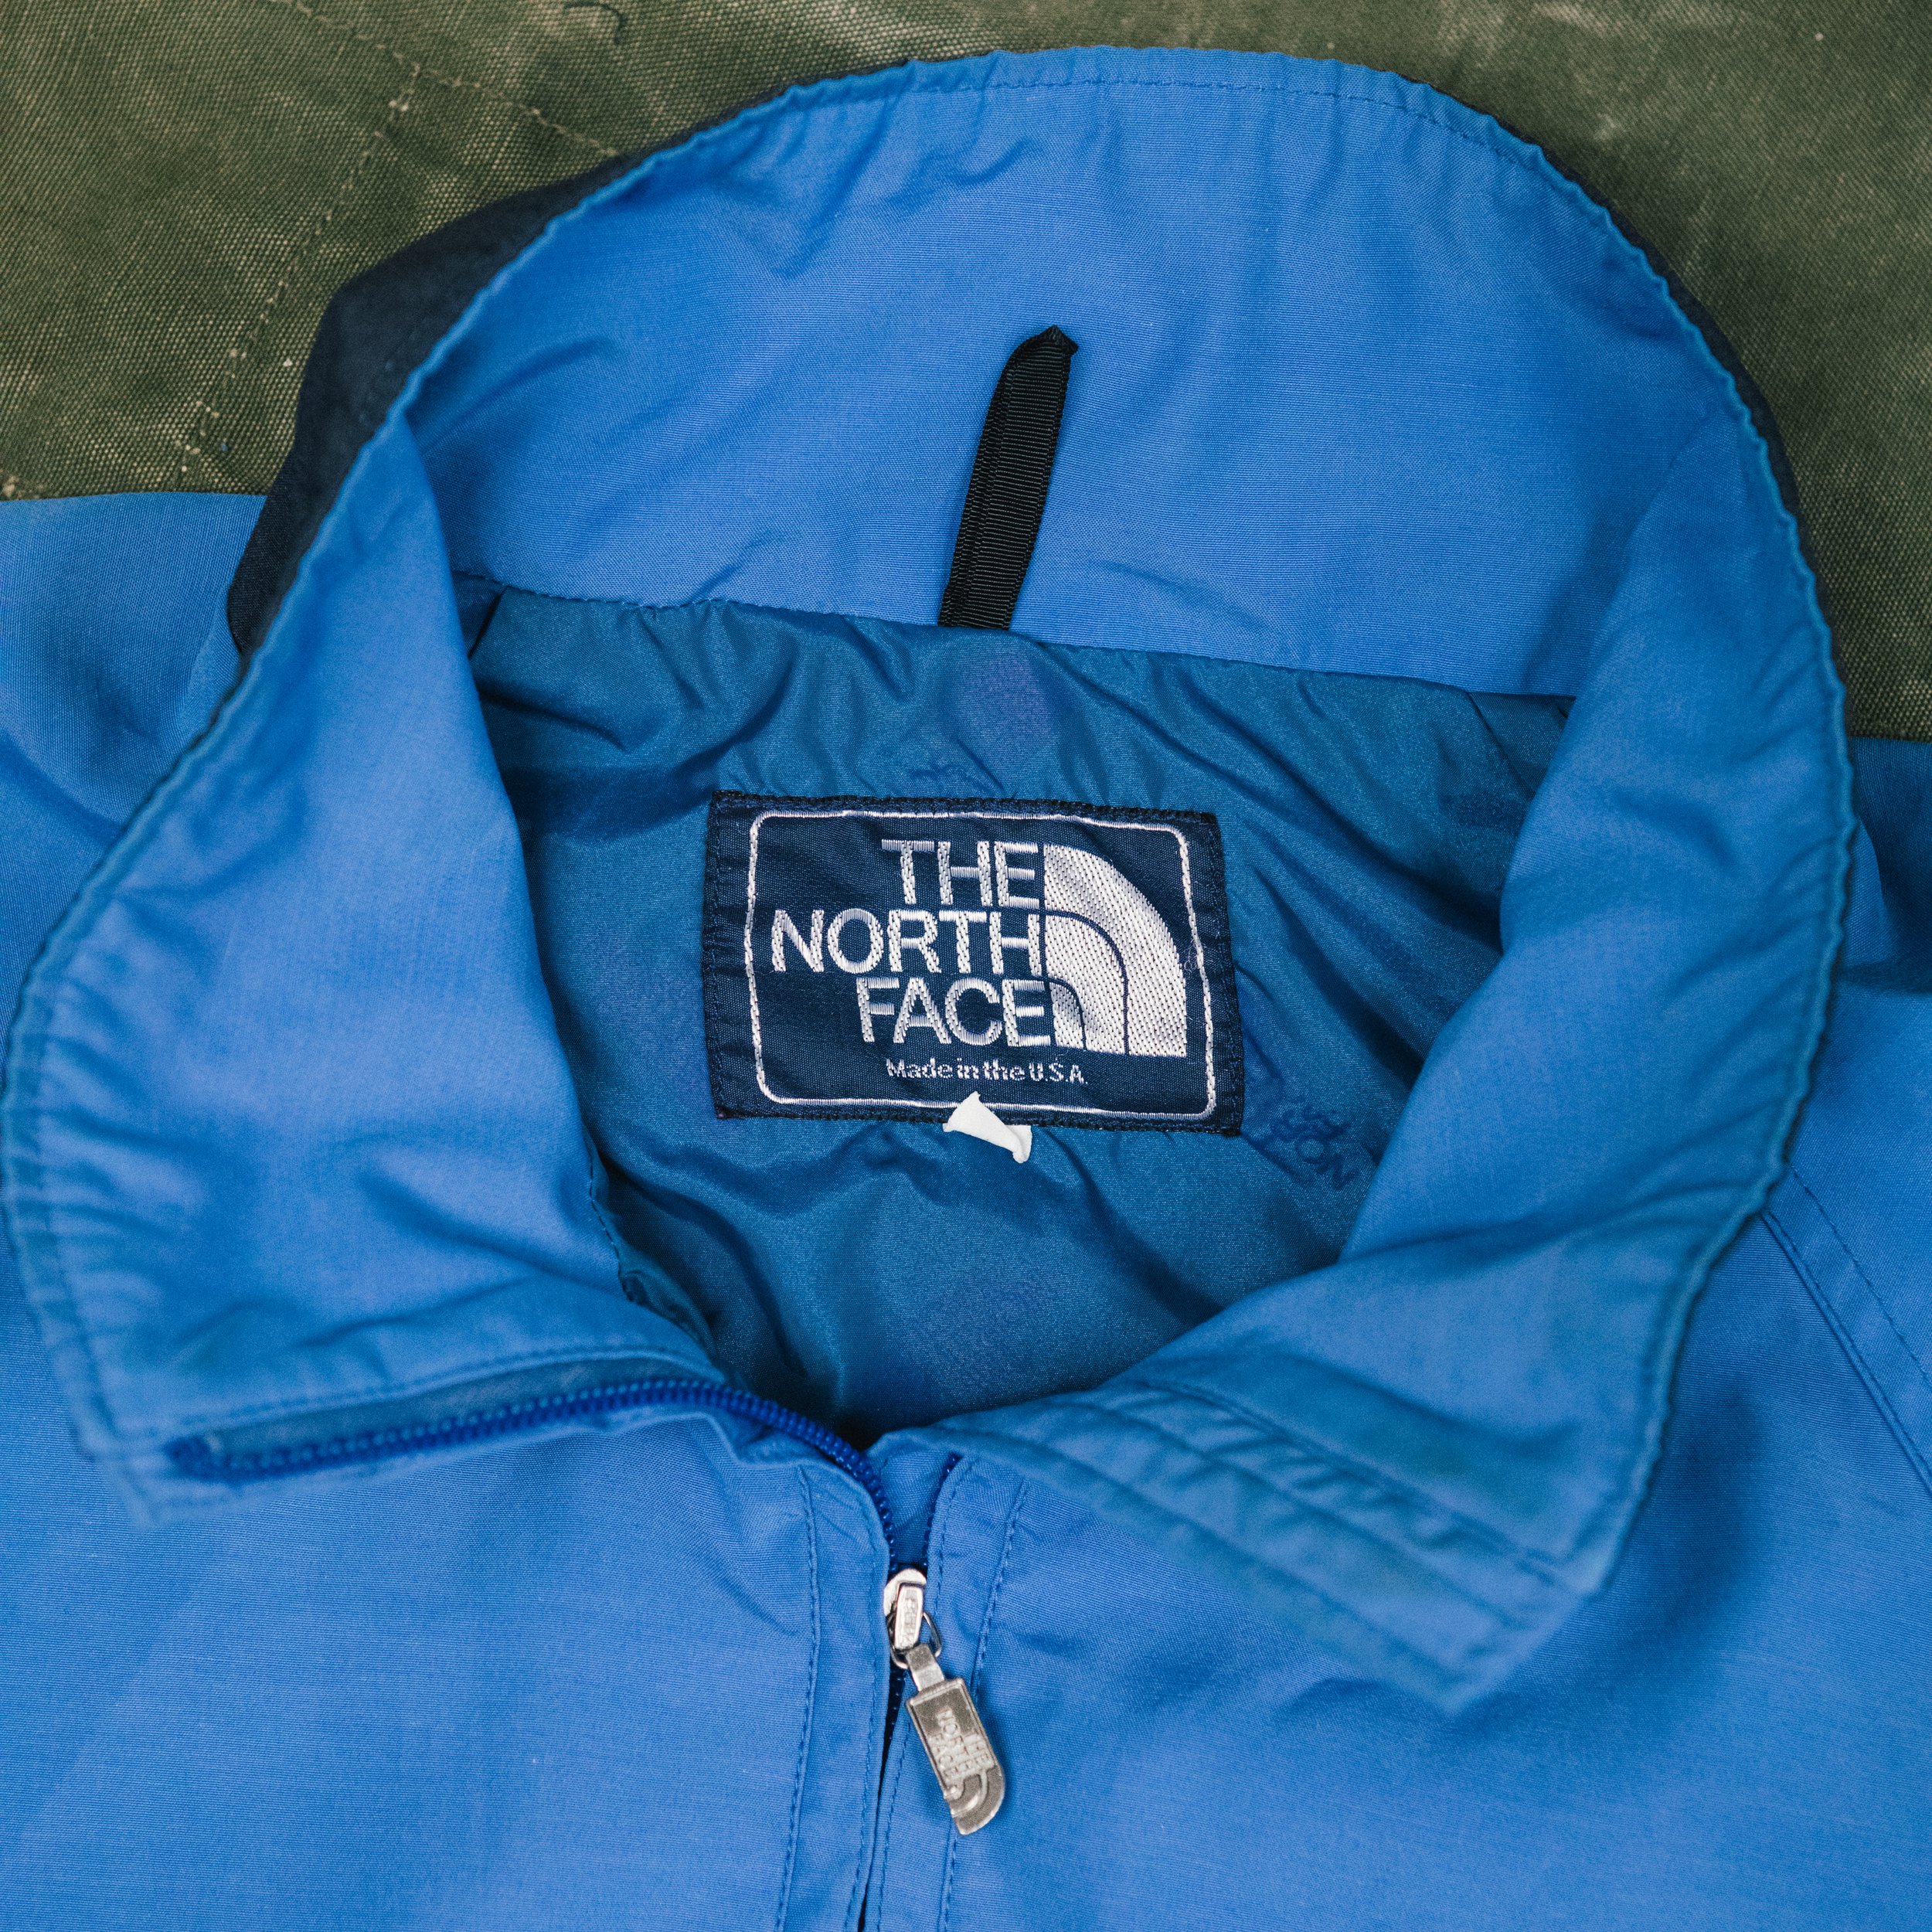 The North Face 1/4 Zip — Somewhat Modest